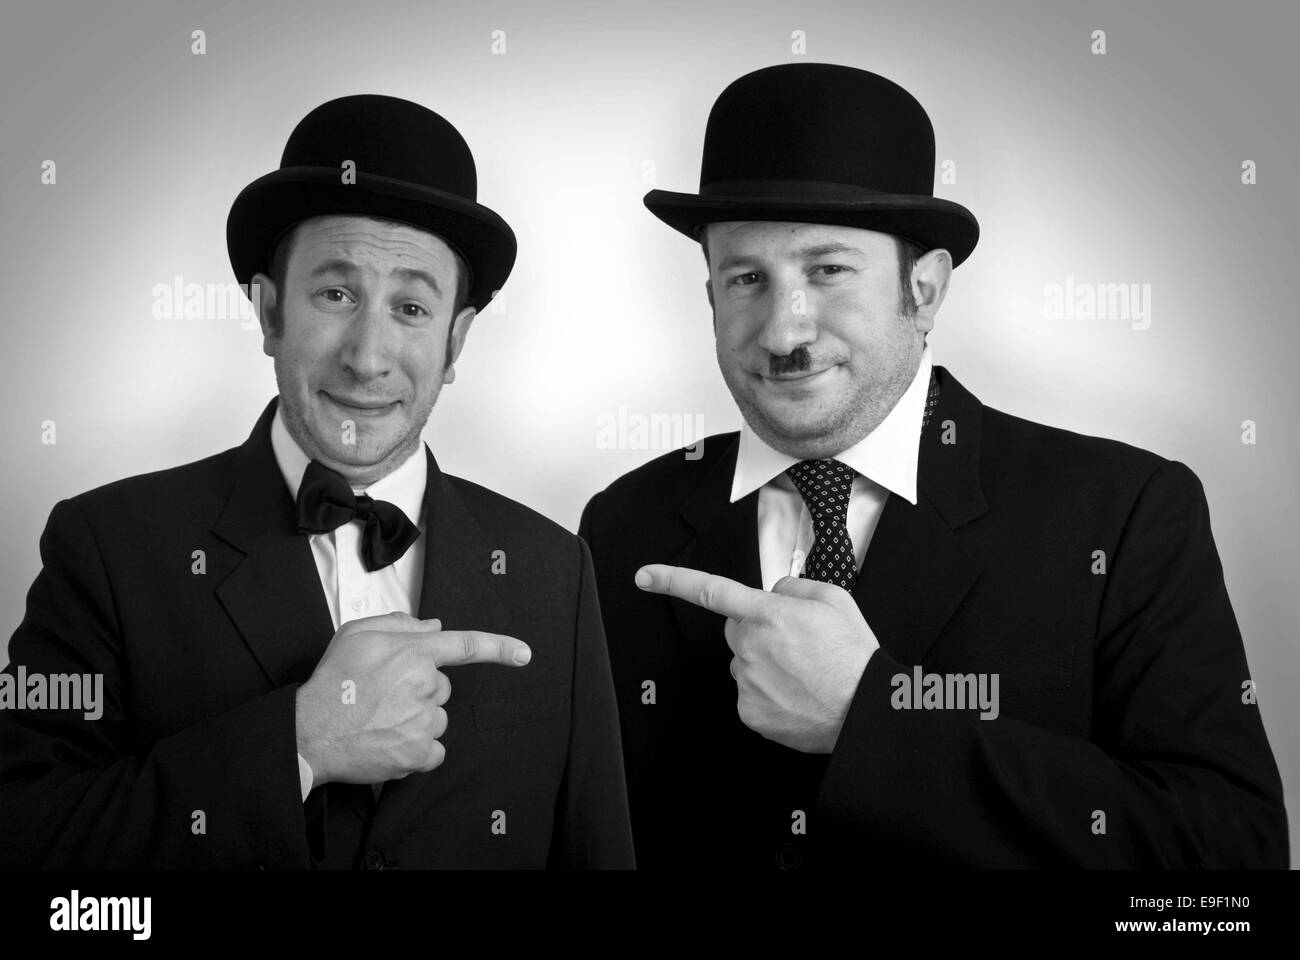 a man dressed as Laurel & Hardy with bowler hats and photoshopped face Stock Photo